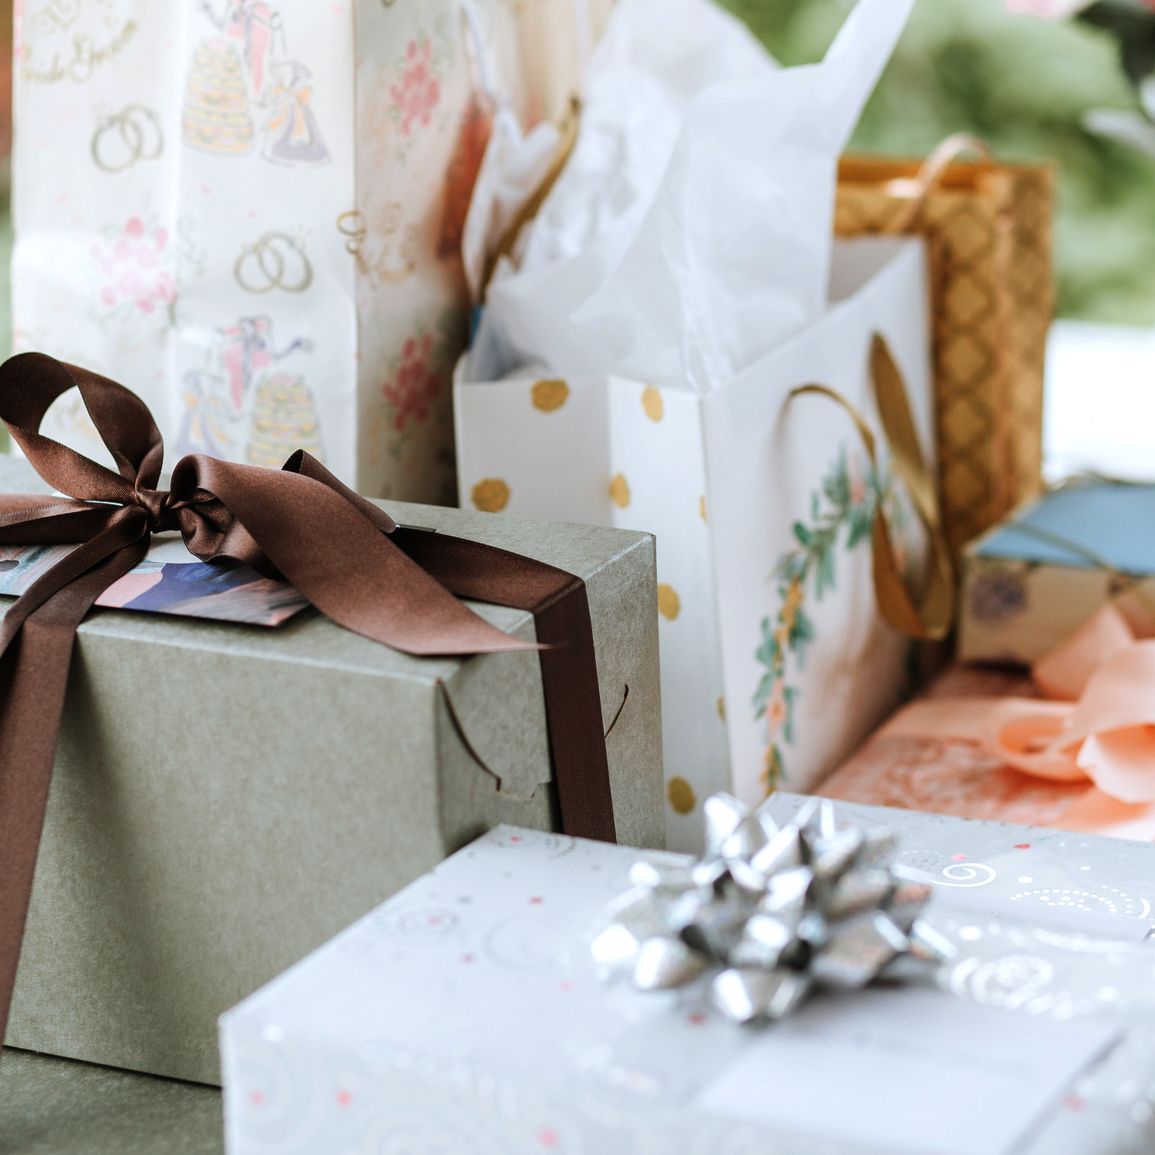 Confused About How Much to Spend on a Wedding Gift? Here's What the Experts Say